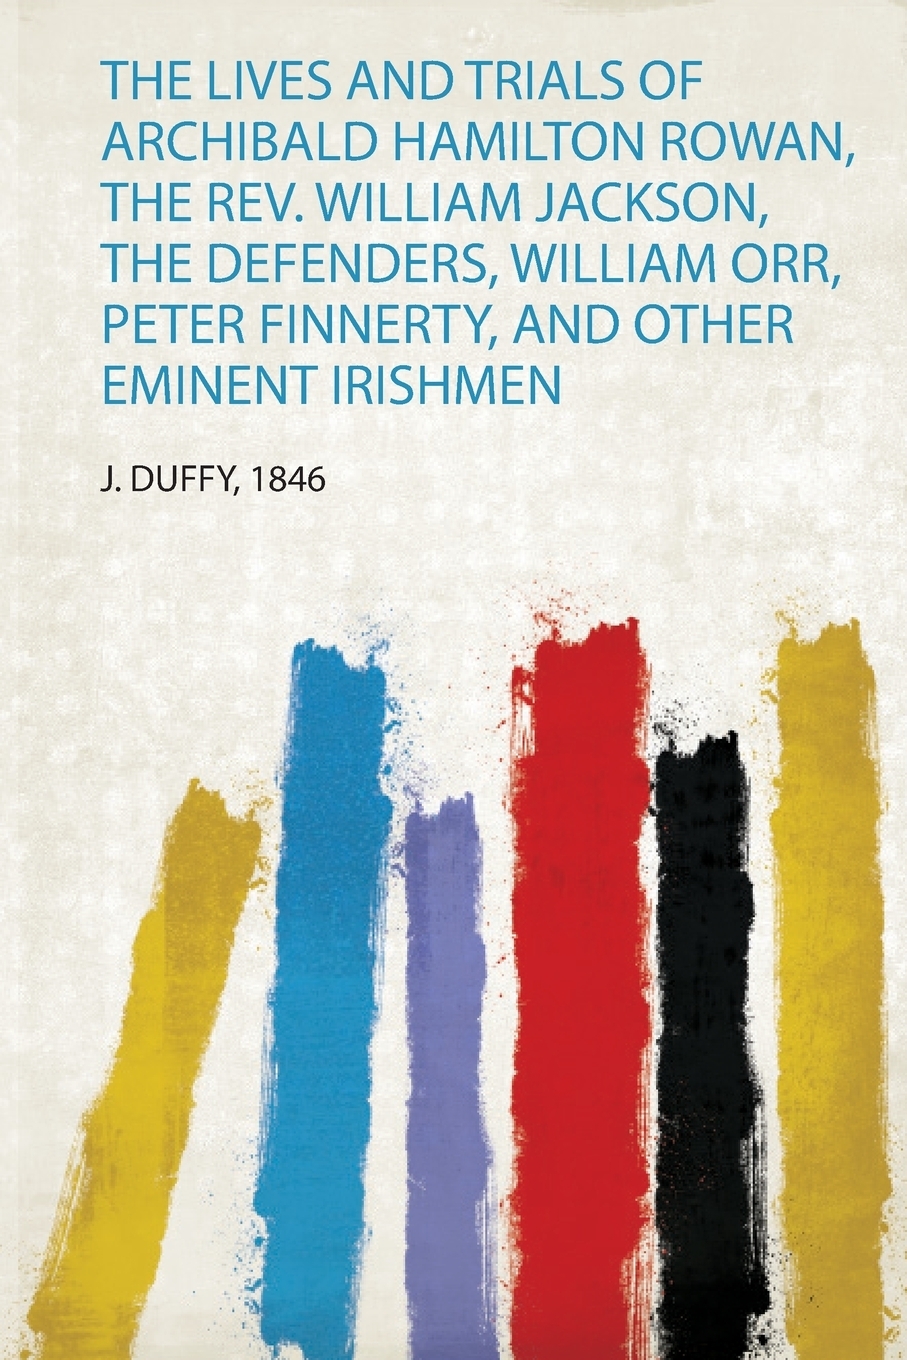 The Lives and Trials of Archibald Hamilton Rowan, the Rev. William Jackson, the Defenders, William Orr, Peter Finnerty, and Other Eminent Irishmen